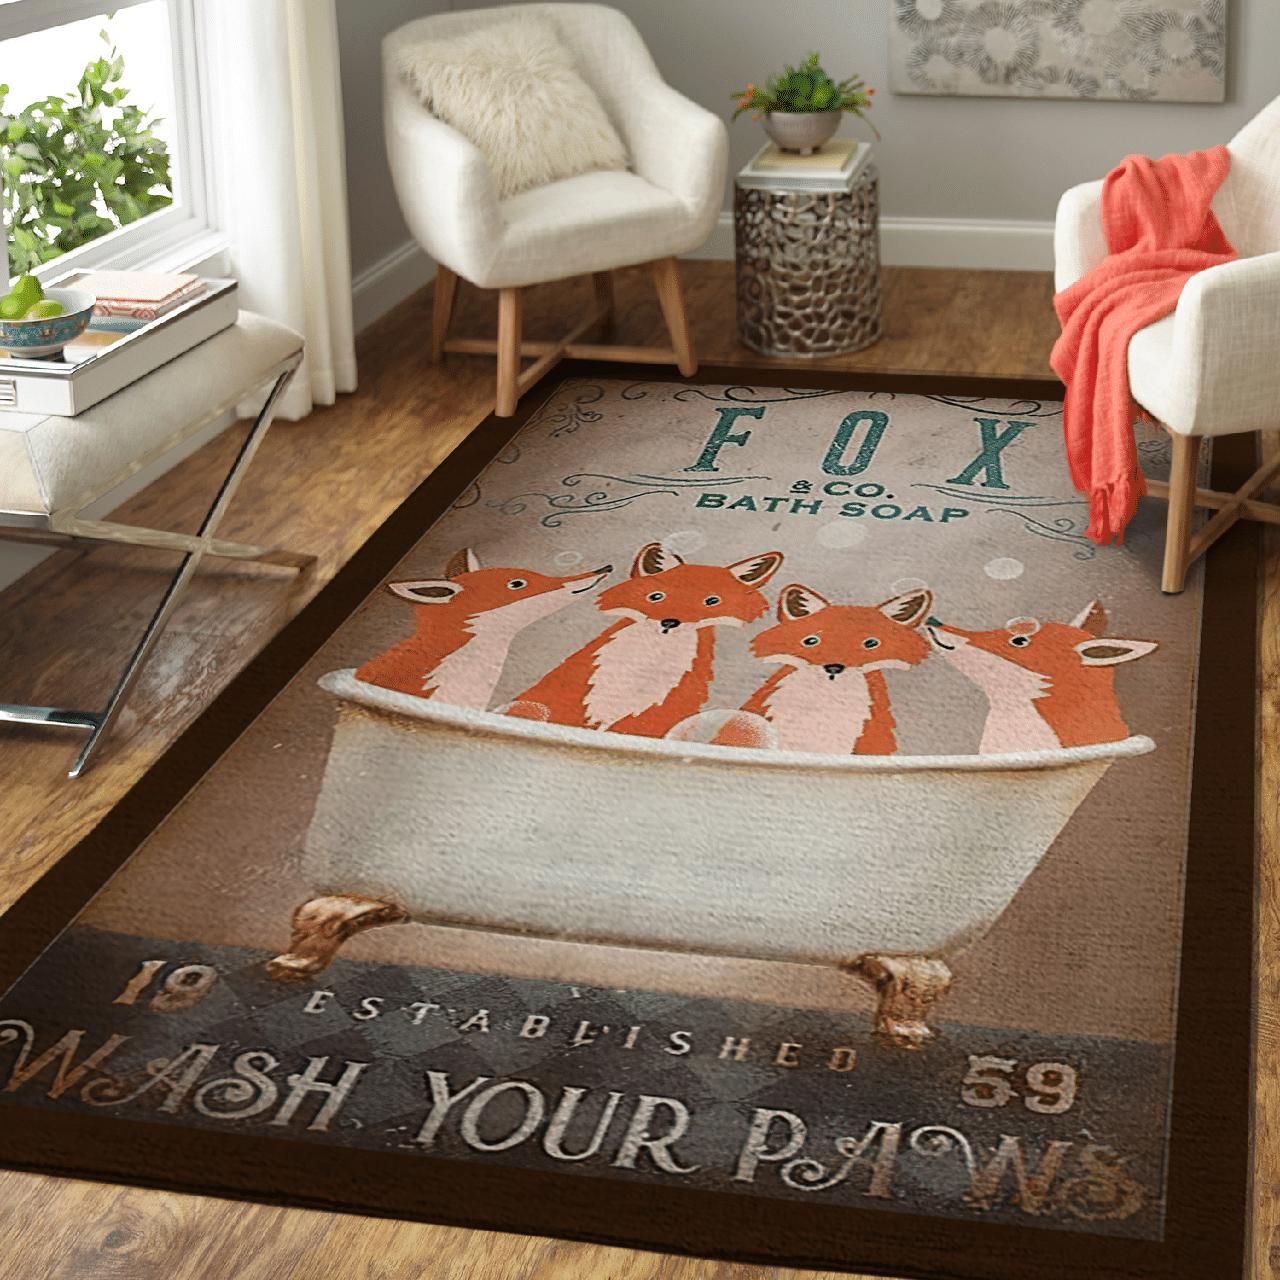 Fox Co Bath Soap Wash Your Paws Gift For Fox Lovers Framed Area Rug